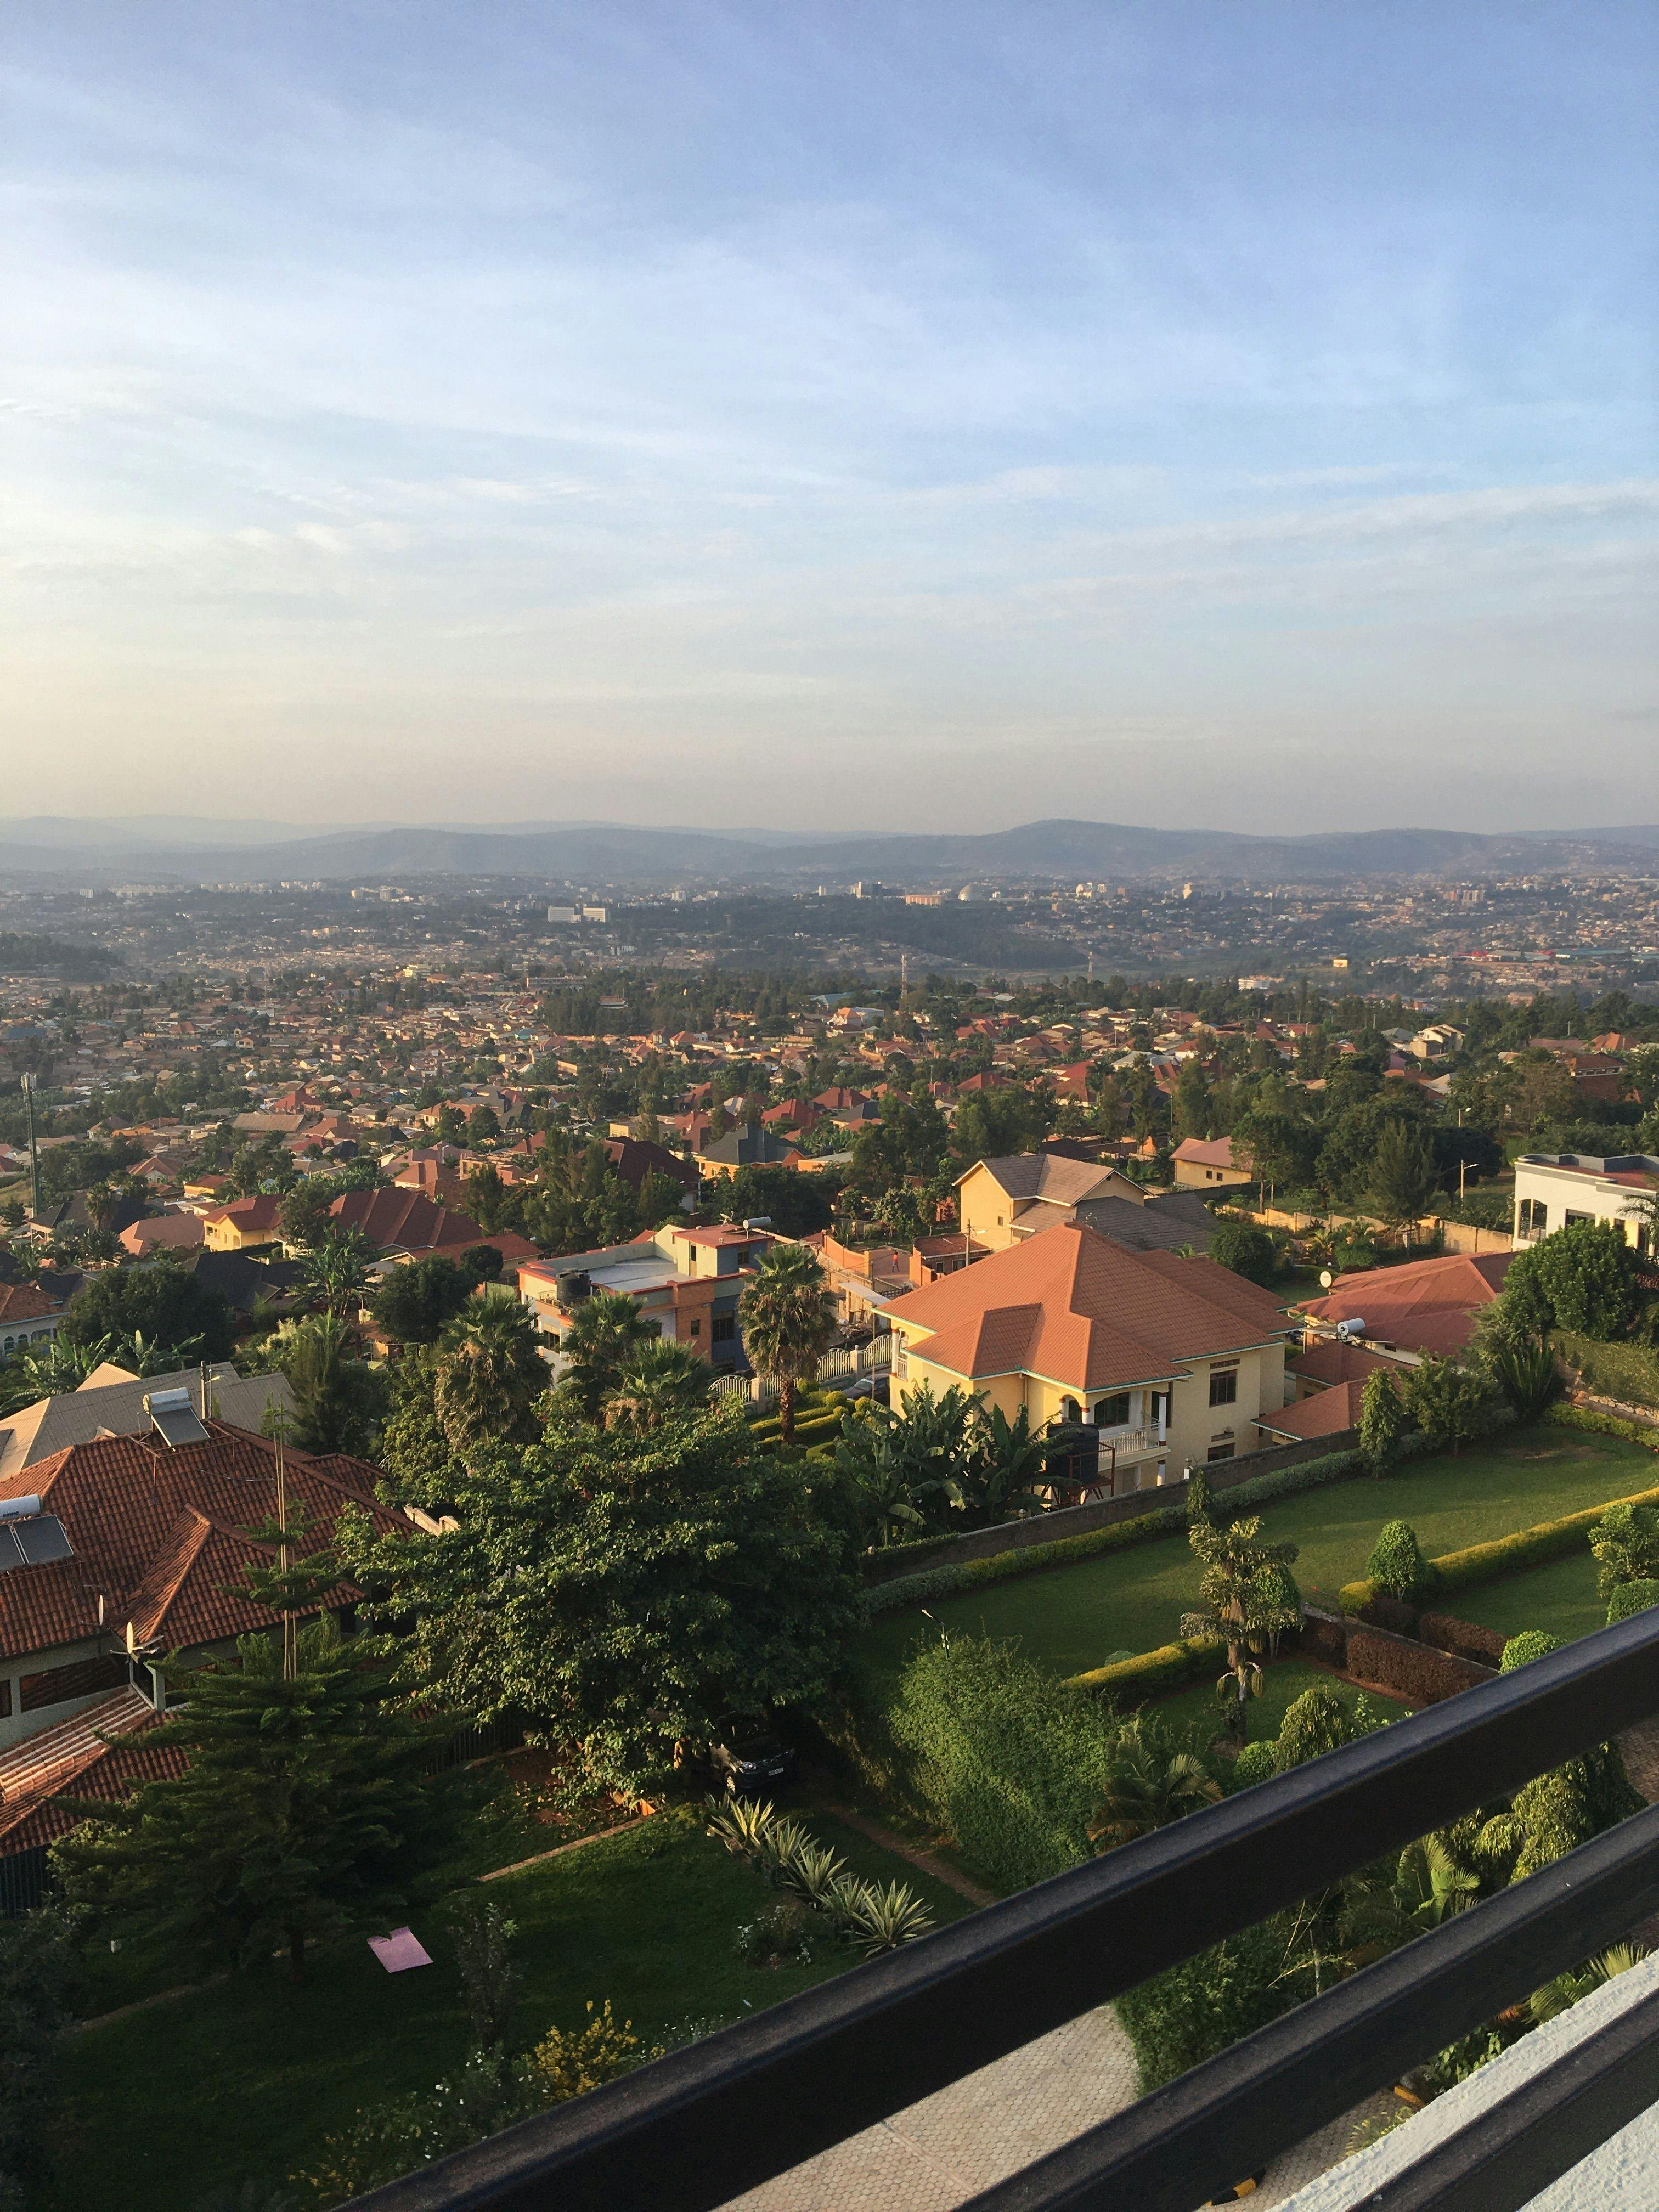 A view of Kigali from Gikondo